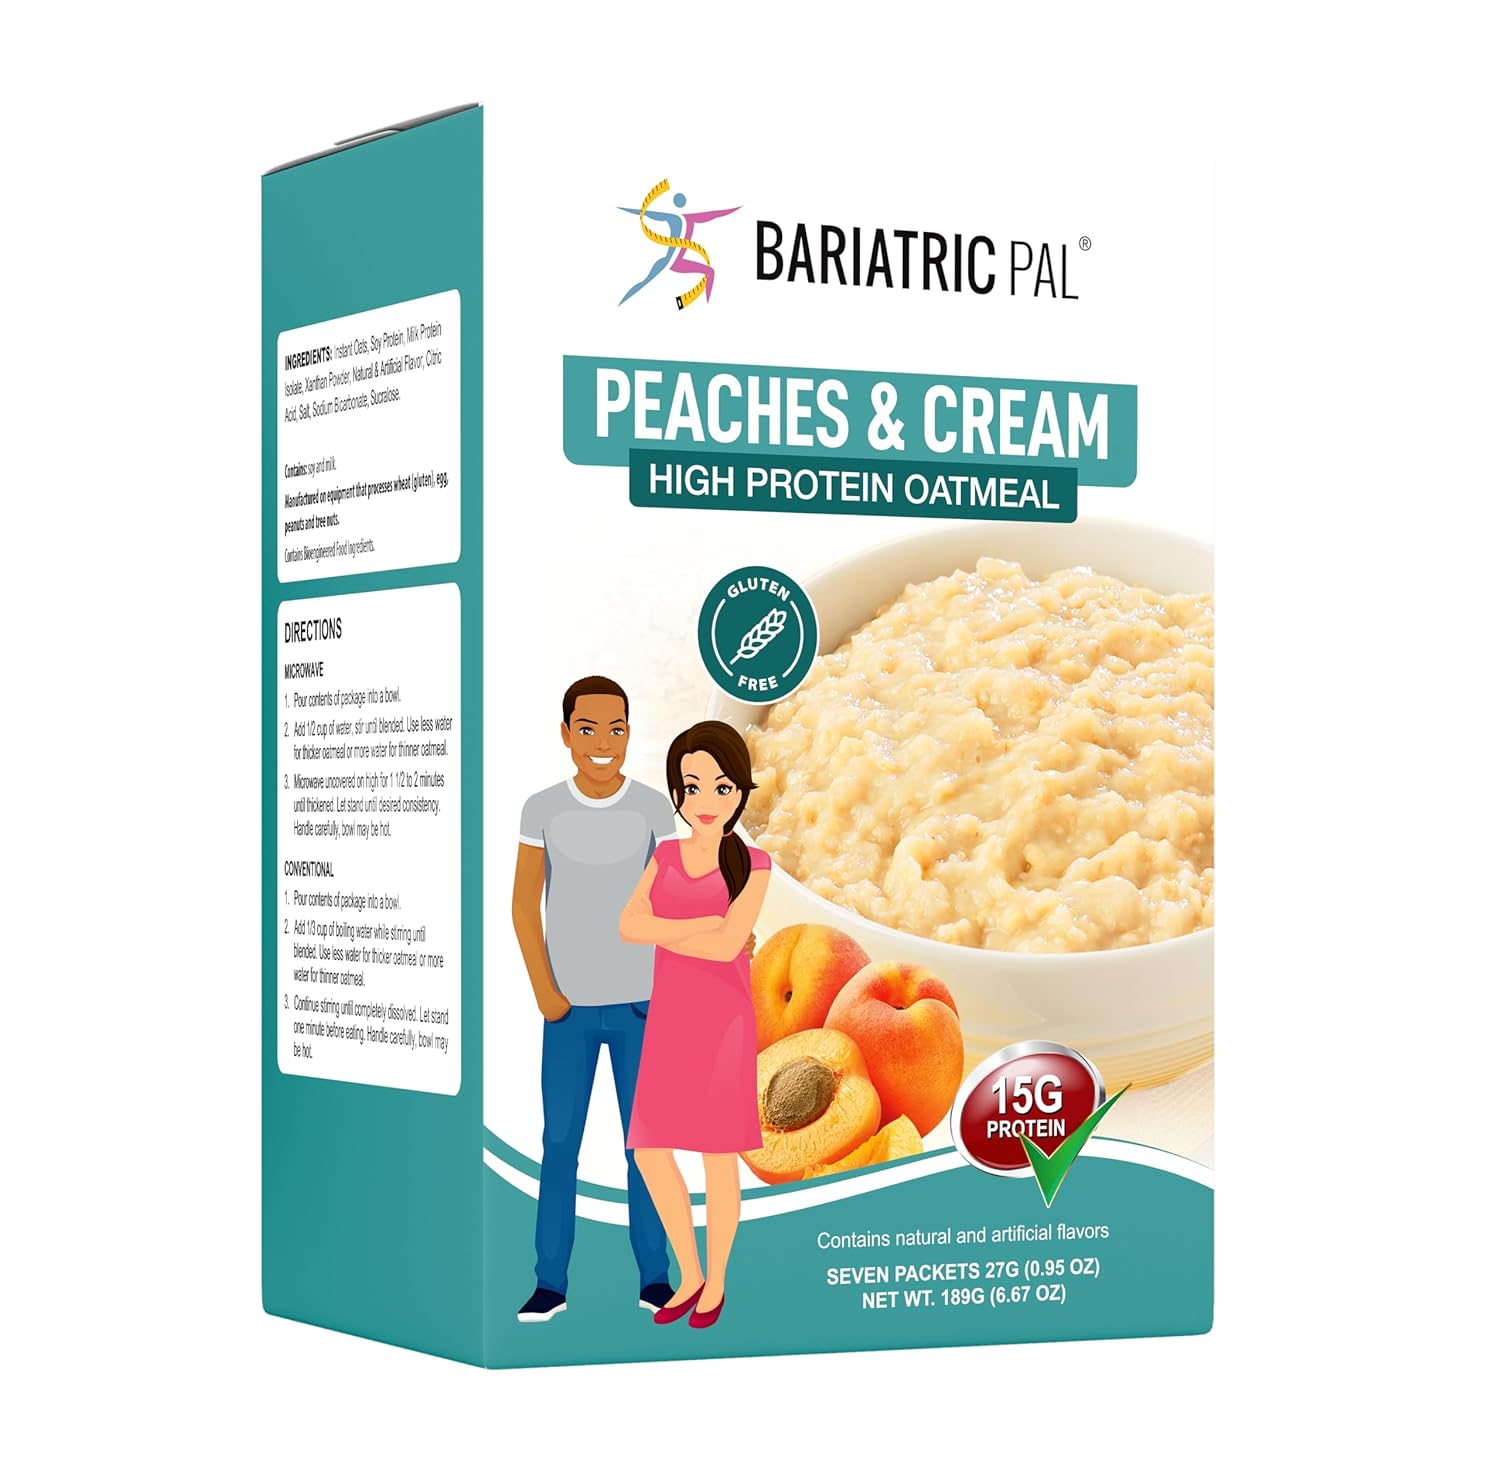 BariatricPal Hot Protein Breakfast - Peaches and Cream Oatmeal (1-Pack)